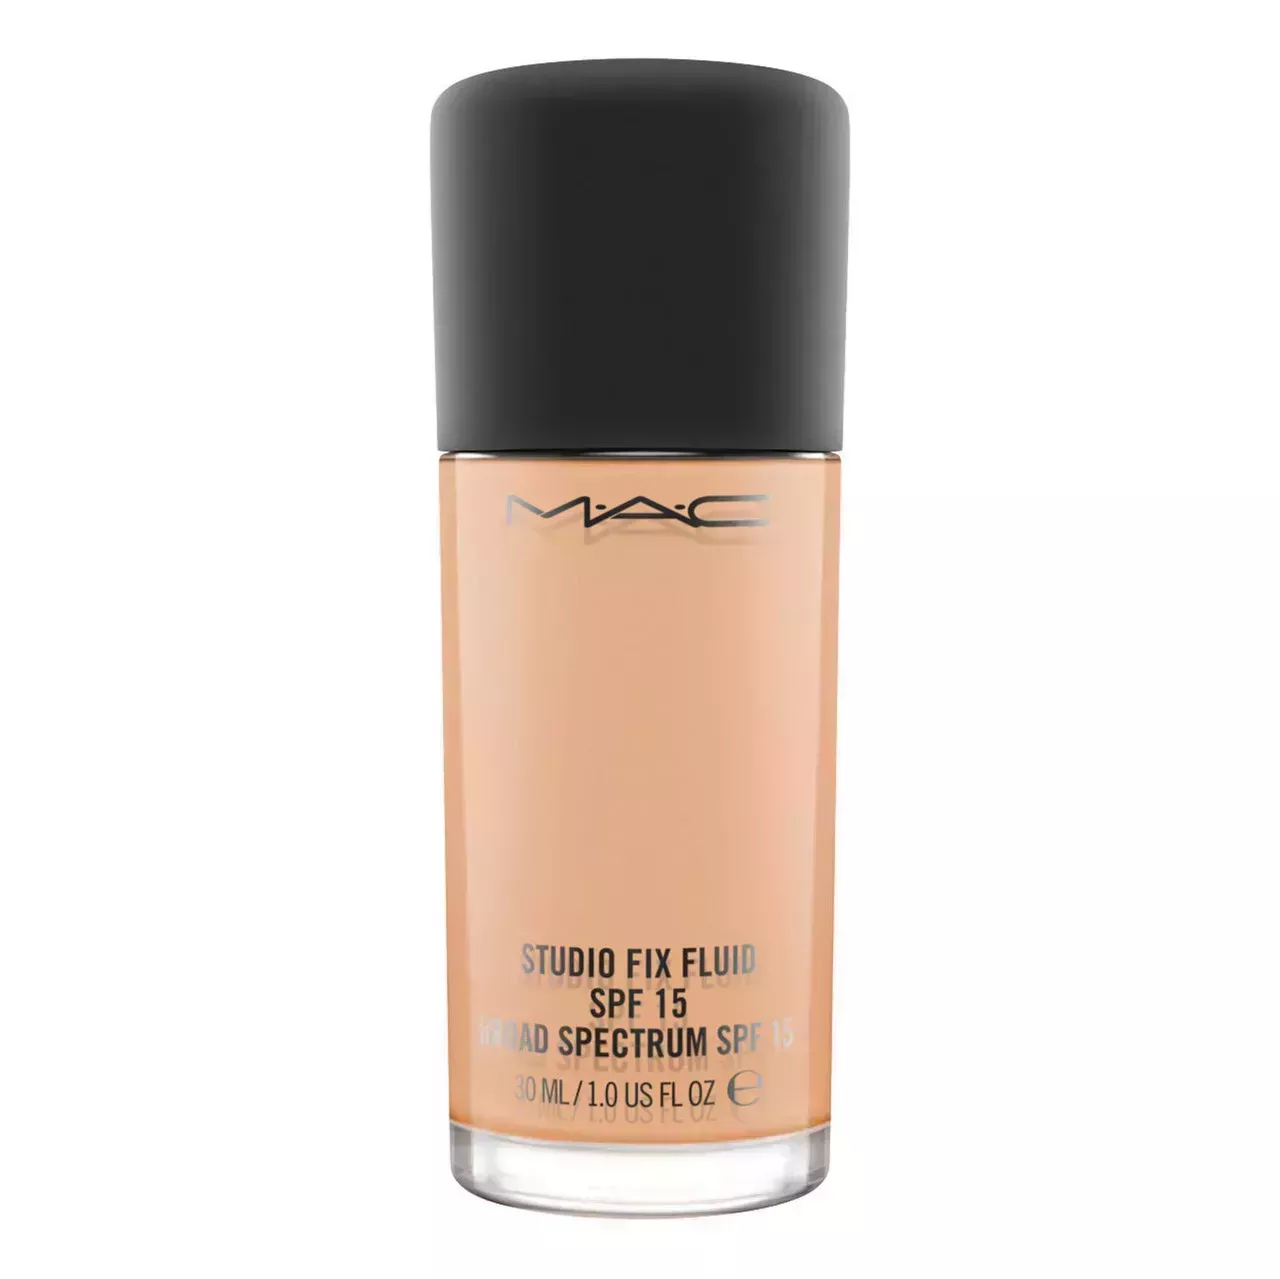 MAC Studio Fix Fluid Foundation in NW30 on white background